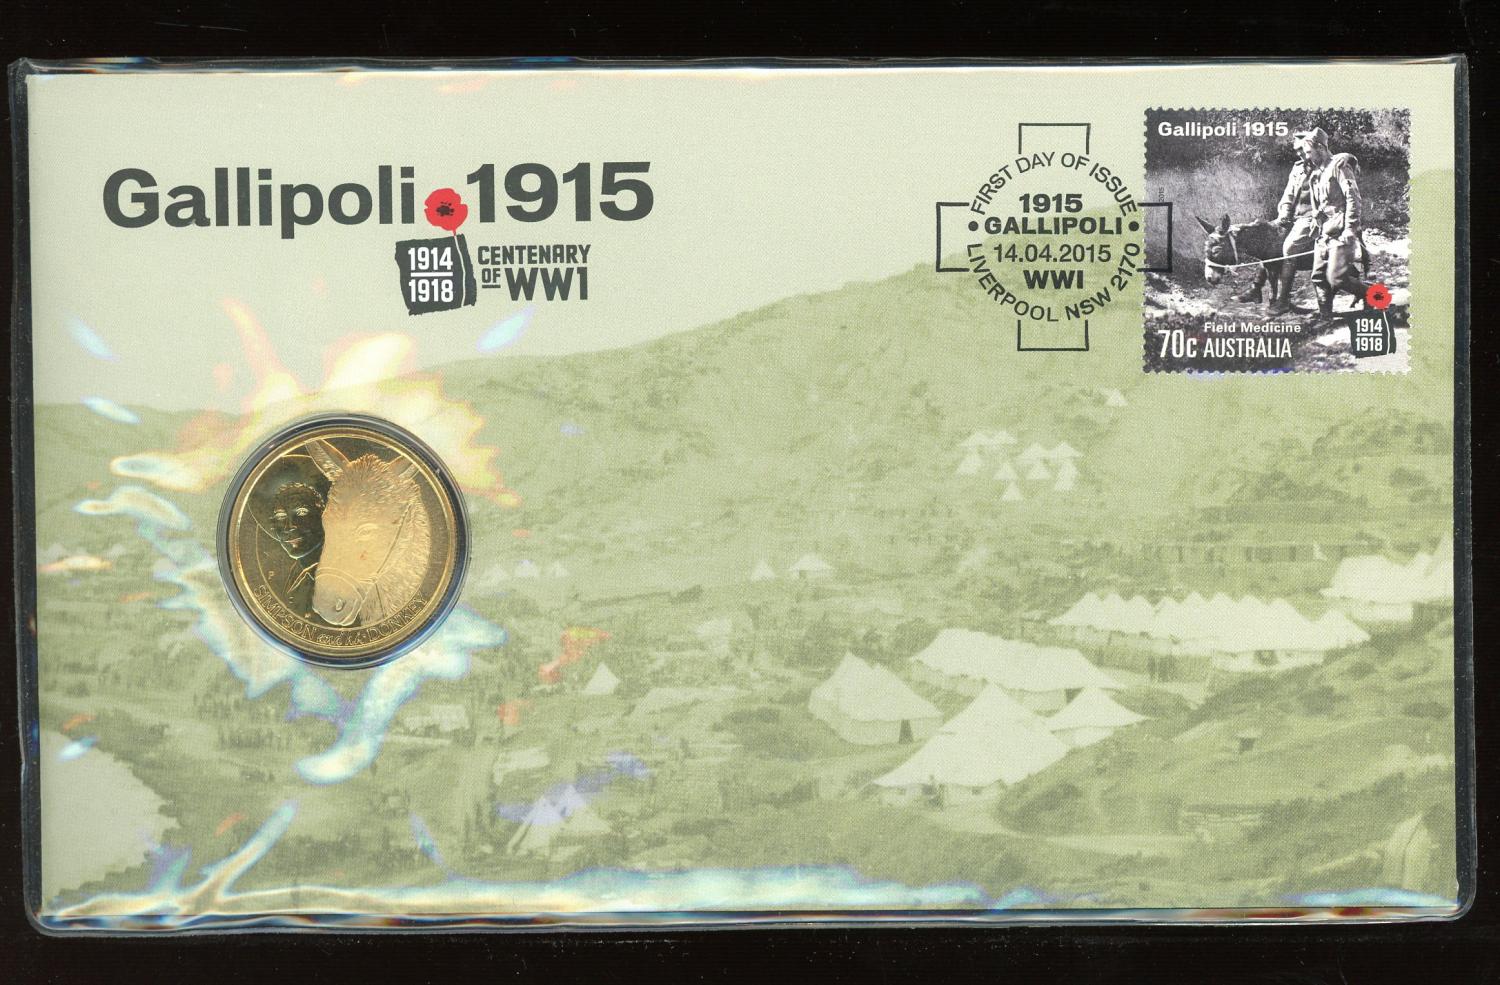 Thumbnail for 2015 Issue 07 Gallipoli 1915 Centenary of WW1